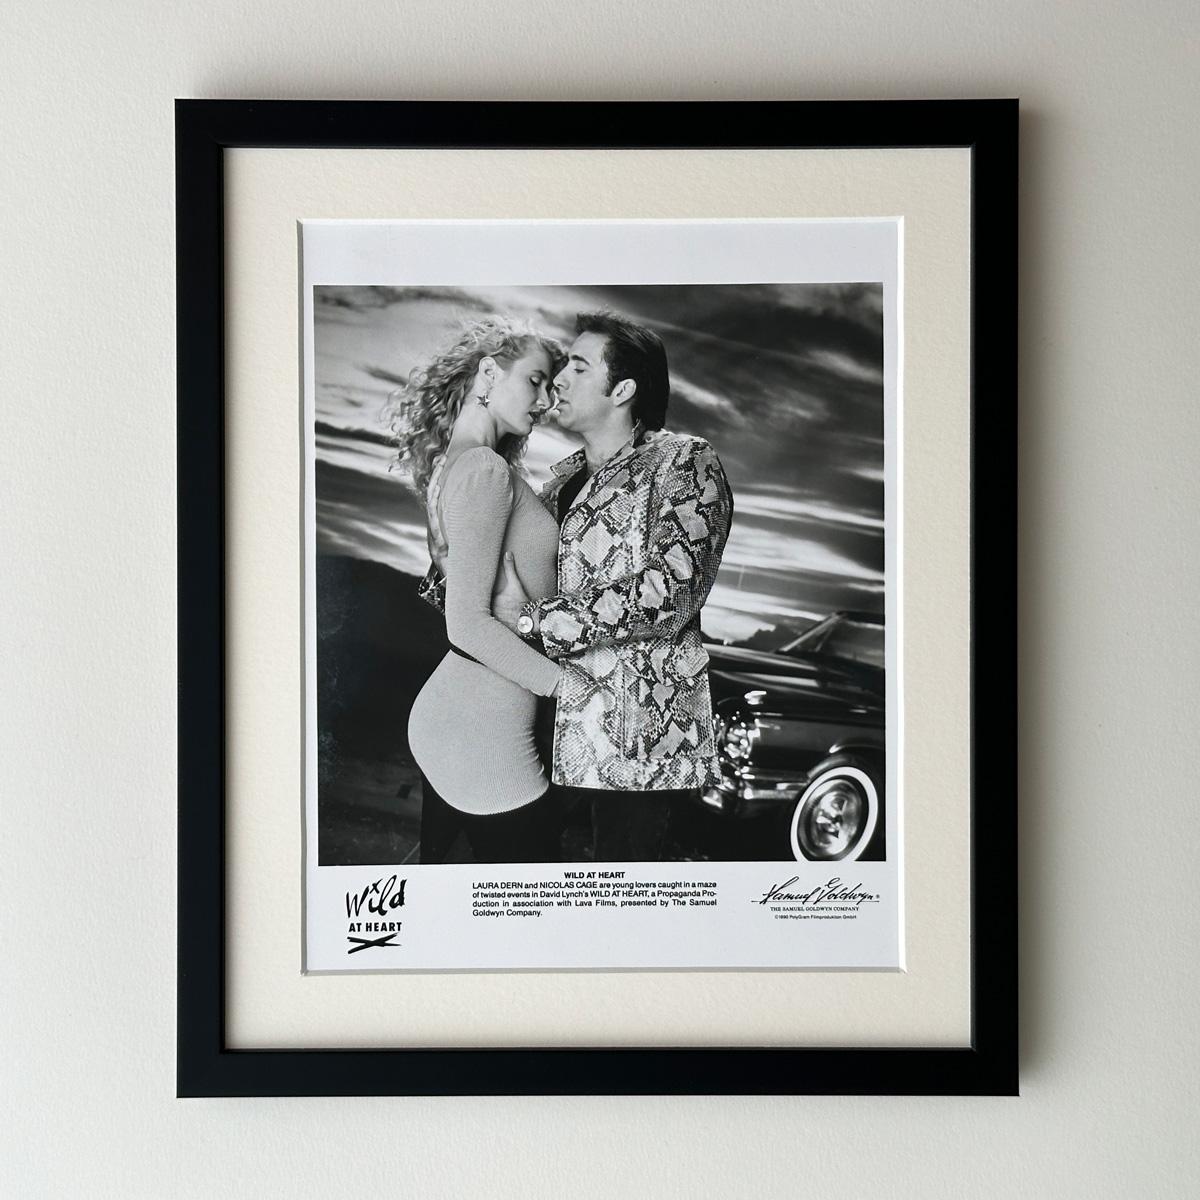 Original Samuel Goldwyn 8x10 inches Publicity Still for David Lynch's Wild At Heart (1990) starring Laura Dern and Nicolas Cage.

Publicity (film/production) stillswerecreated to helpstudios promote their new films. The stills were included with